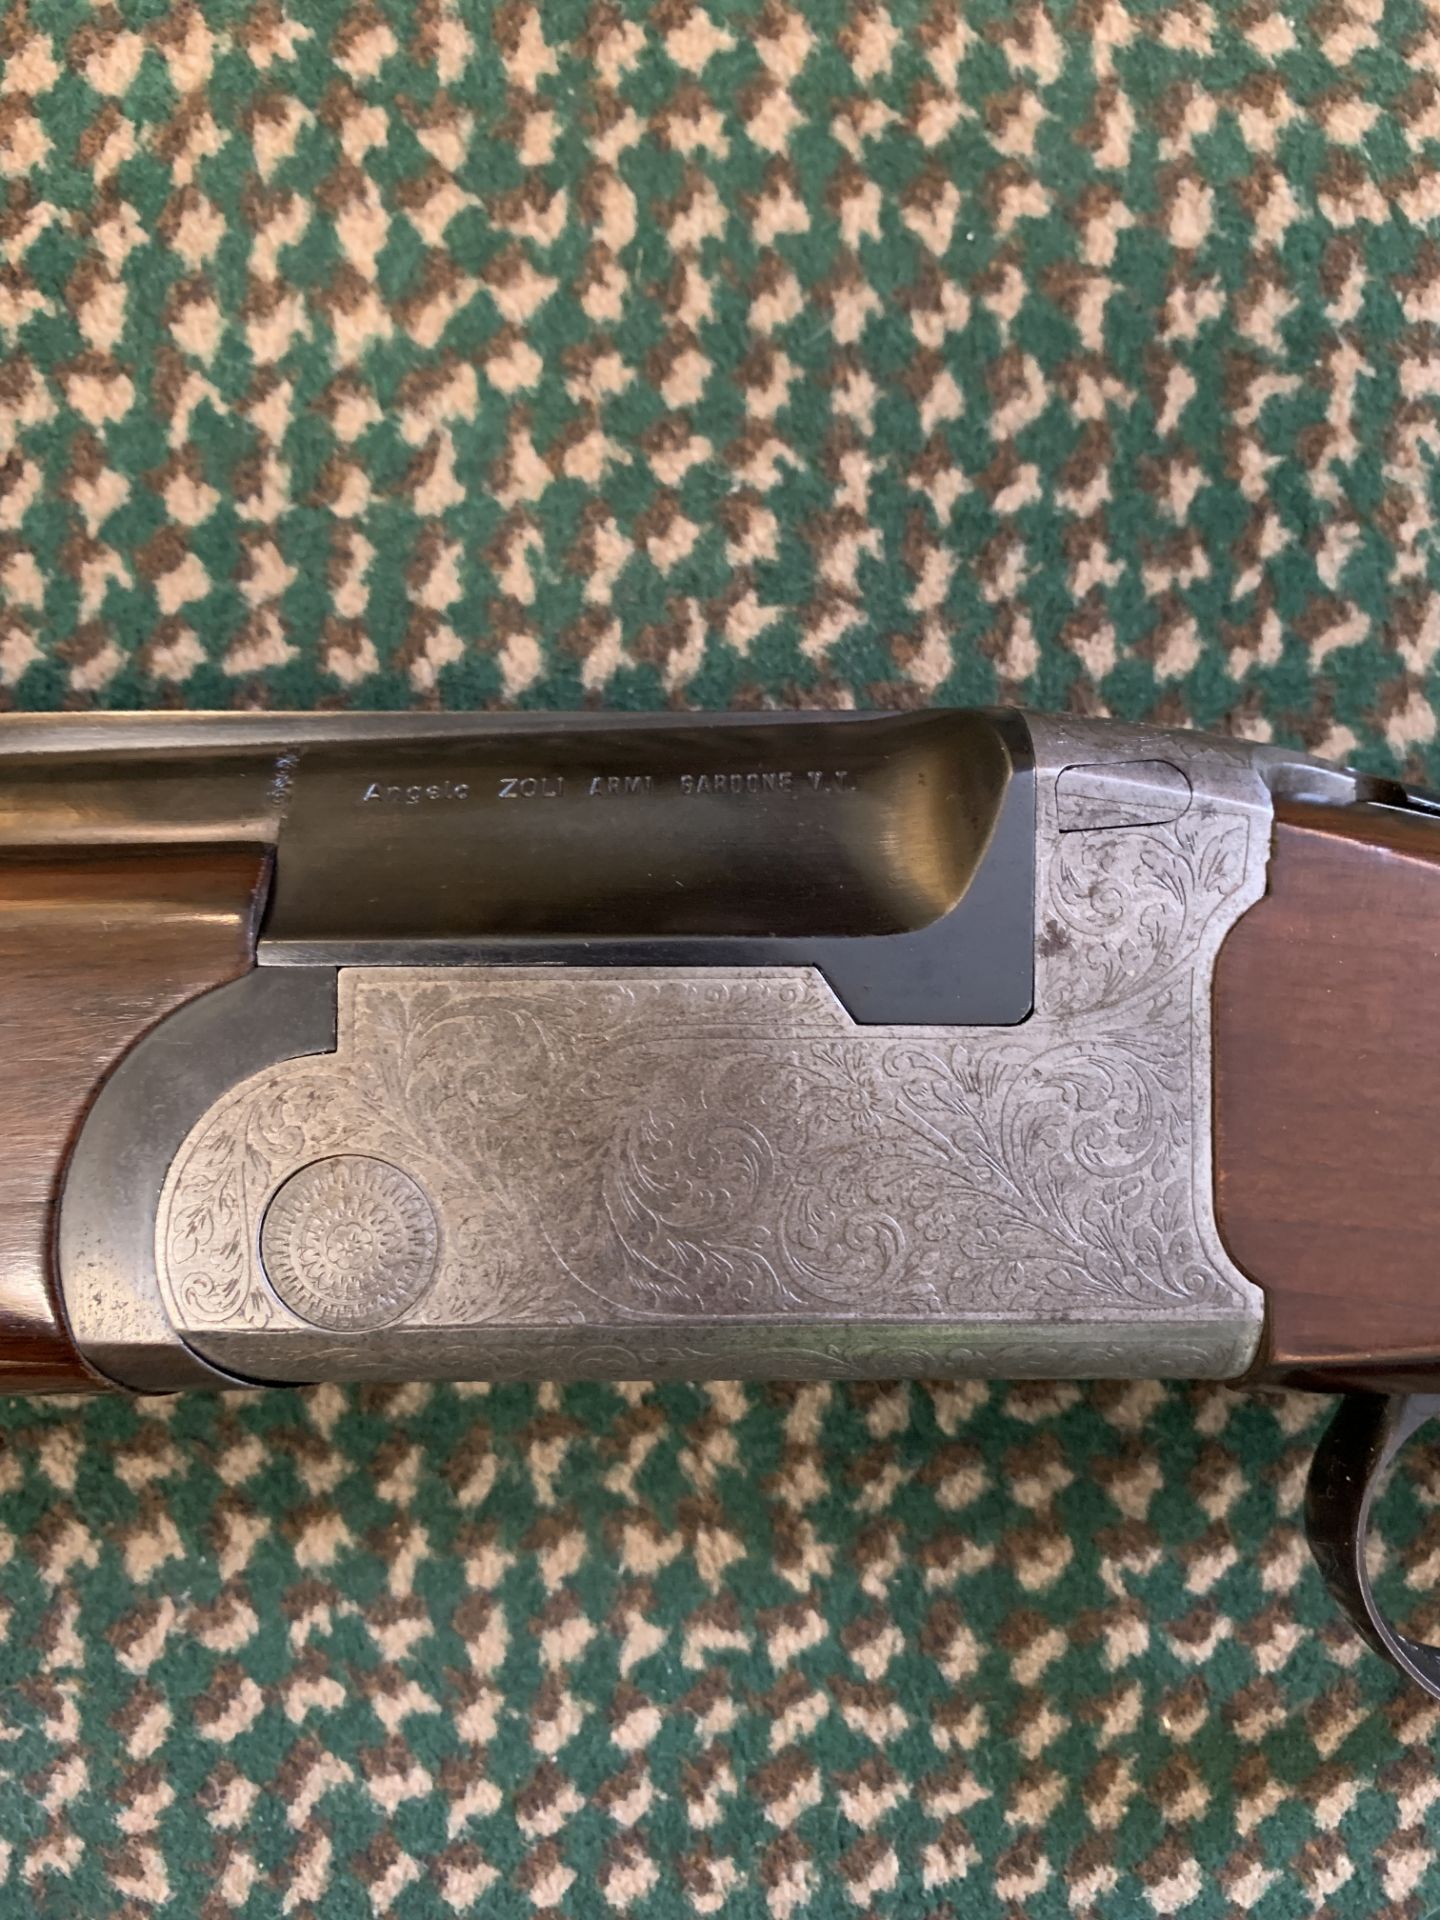 Zoli 12 bore over and under shotgun and cleaning kit. The buyer must have a Shotgun Licence - Image 4 of 5